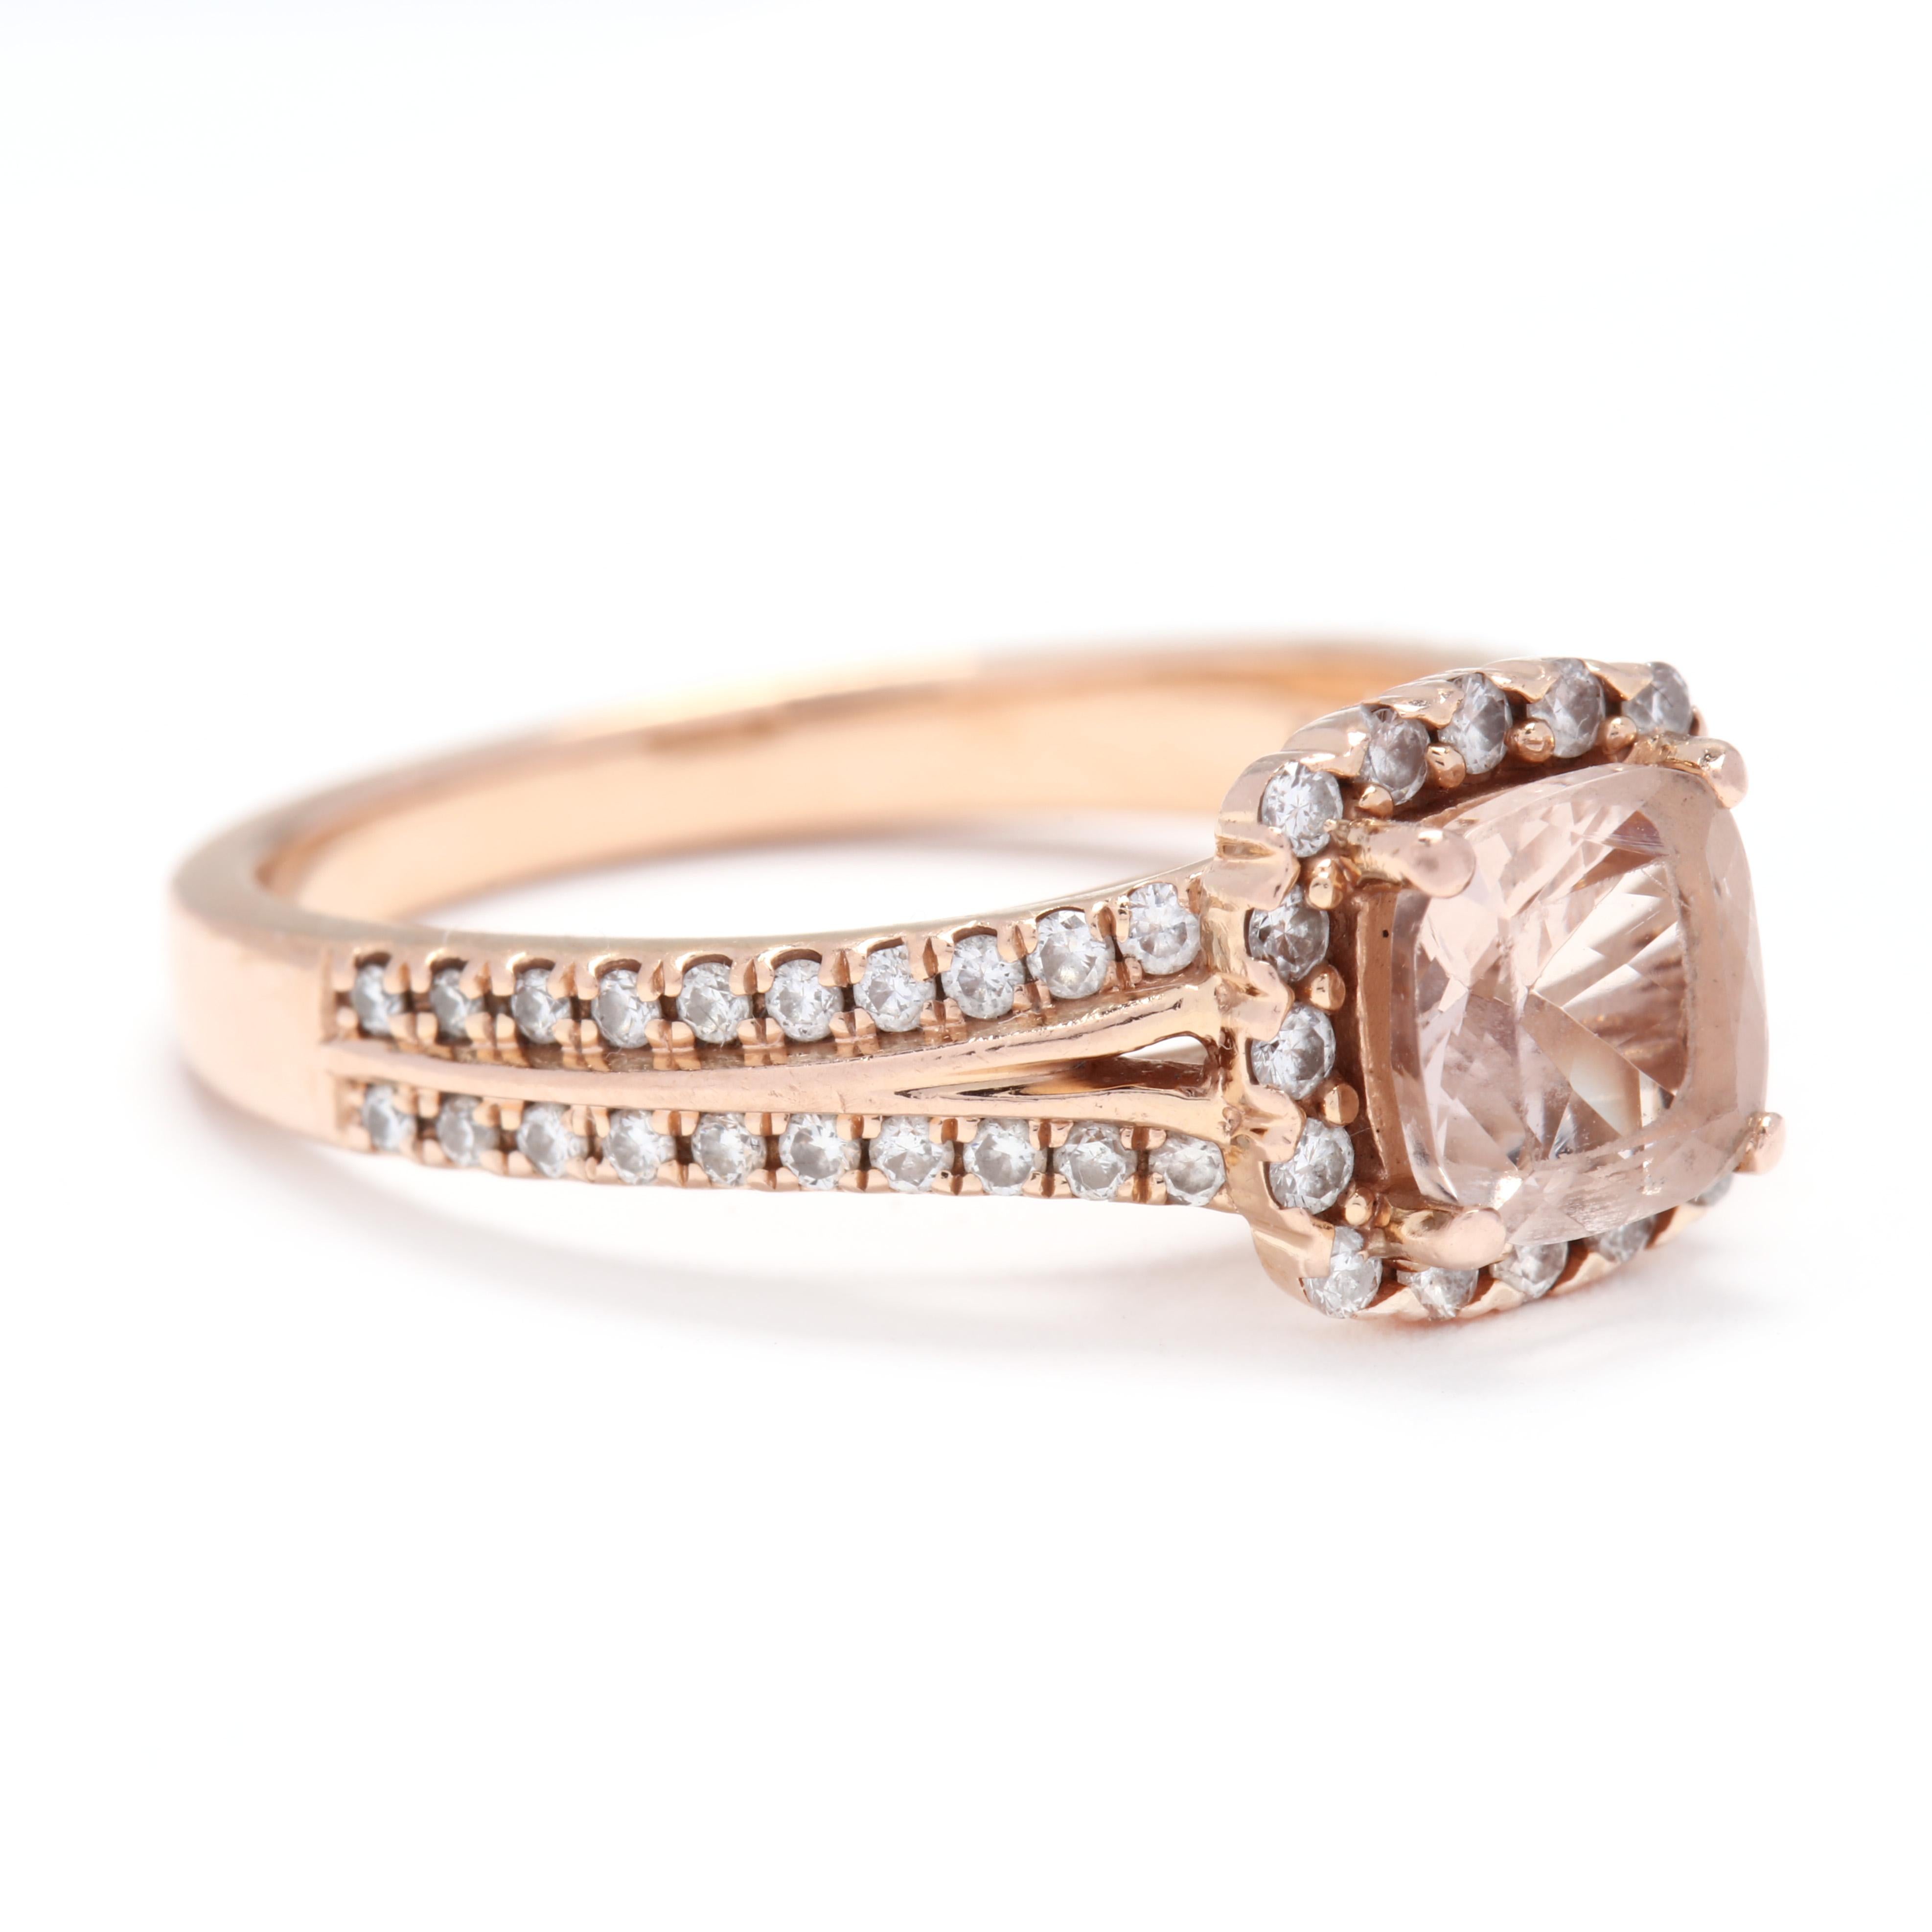 14k rose gold morganite and diamond halo ring. A classic halo ring with a cushion-cut Morganite weighing 0.60 carats in the center. The band has two rows of diamonds that weigh approximately 0.36 carats total. The rose gold is a lovely complement to